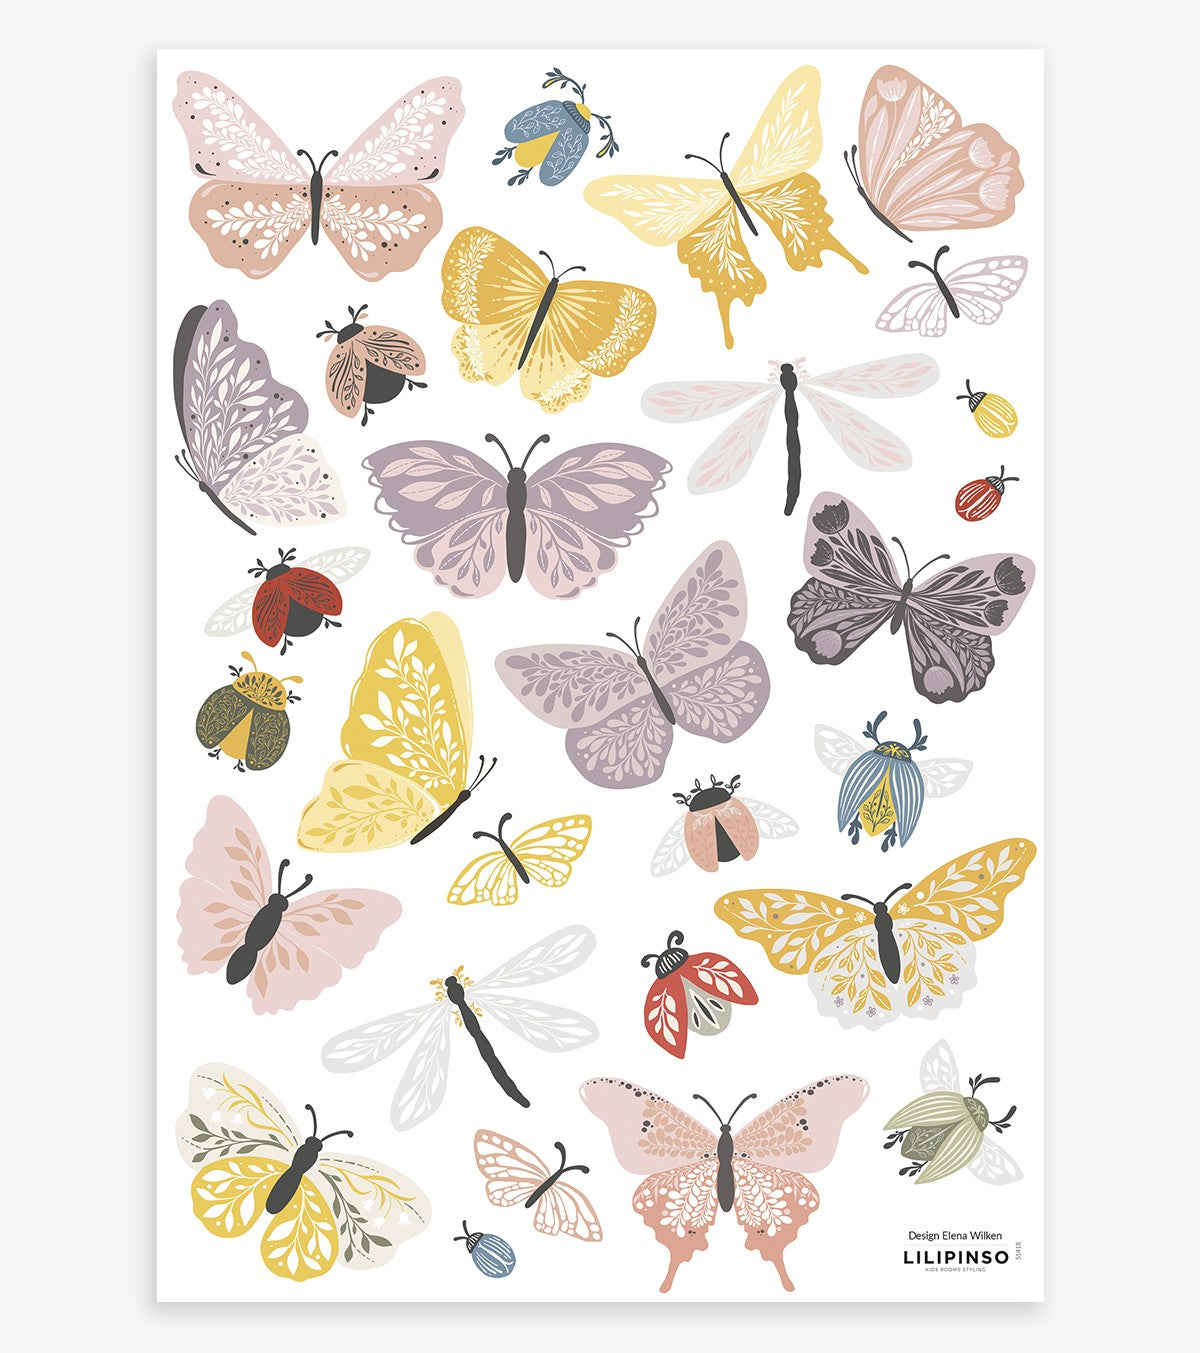 WILDFLOWERS - Stickers muraux - Papillons et insectes